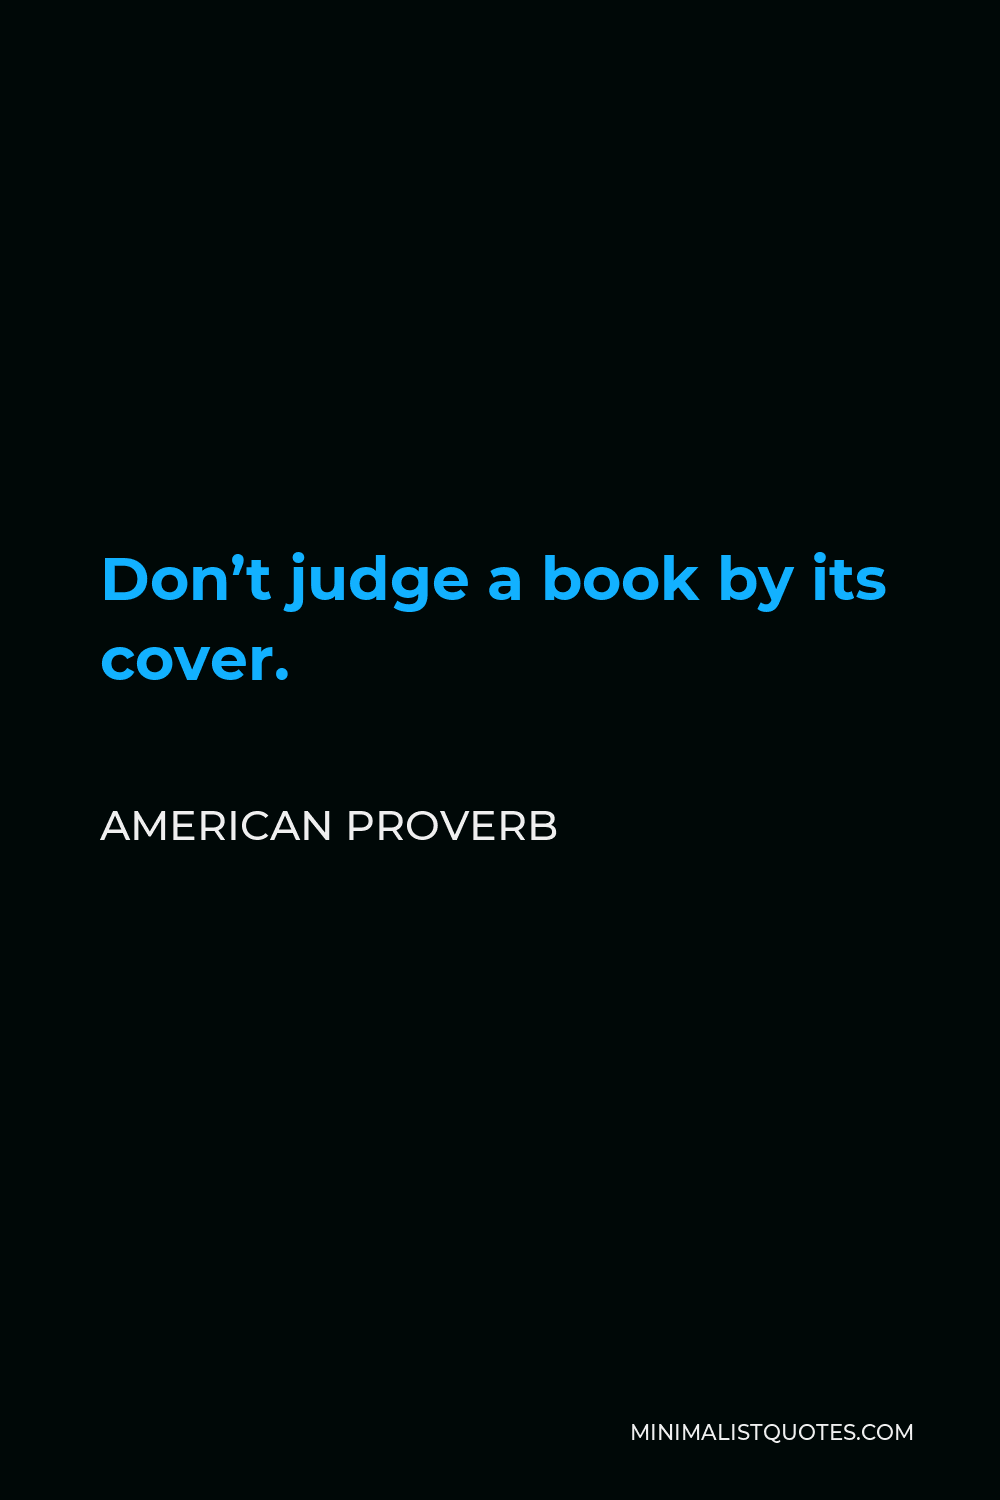 American Proverb Quote - Don’t judge a book by its cover.